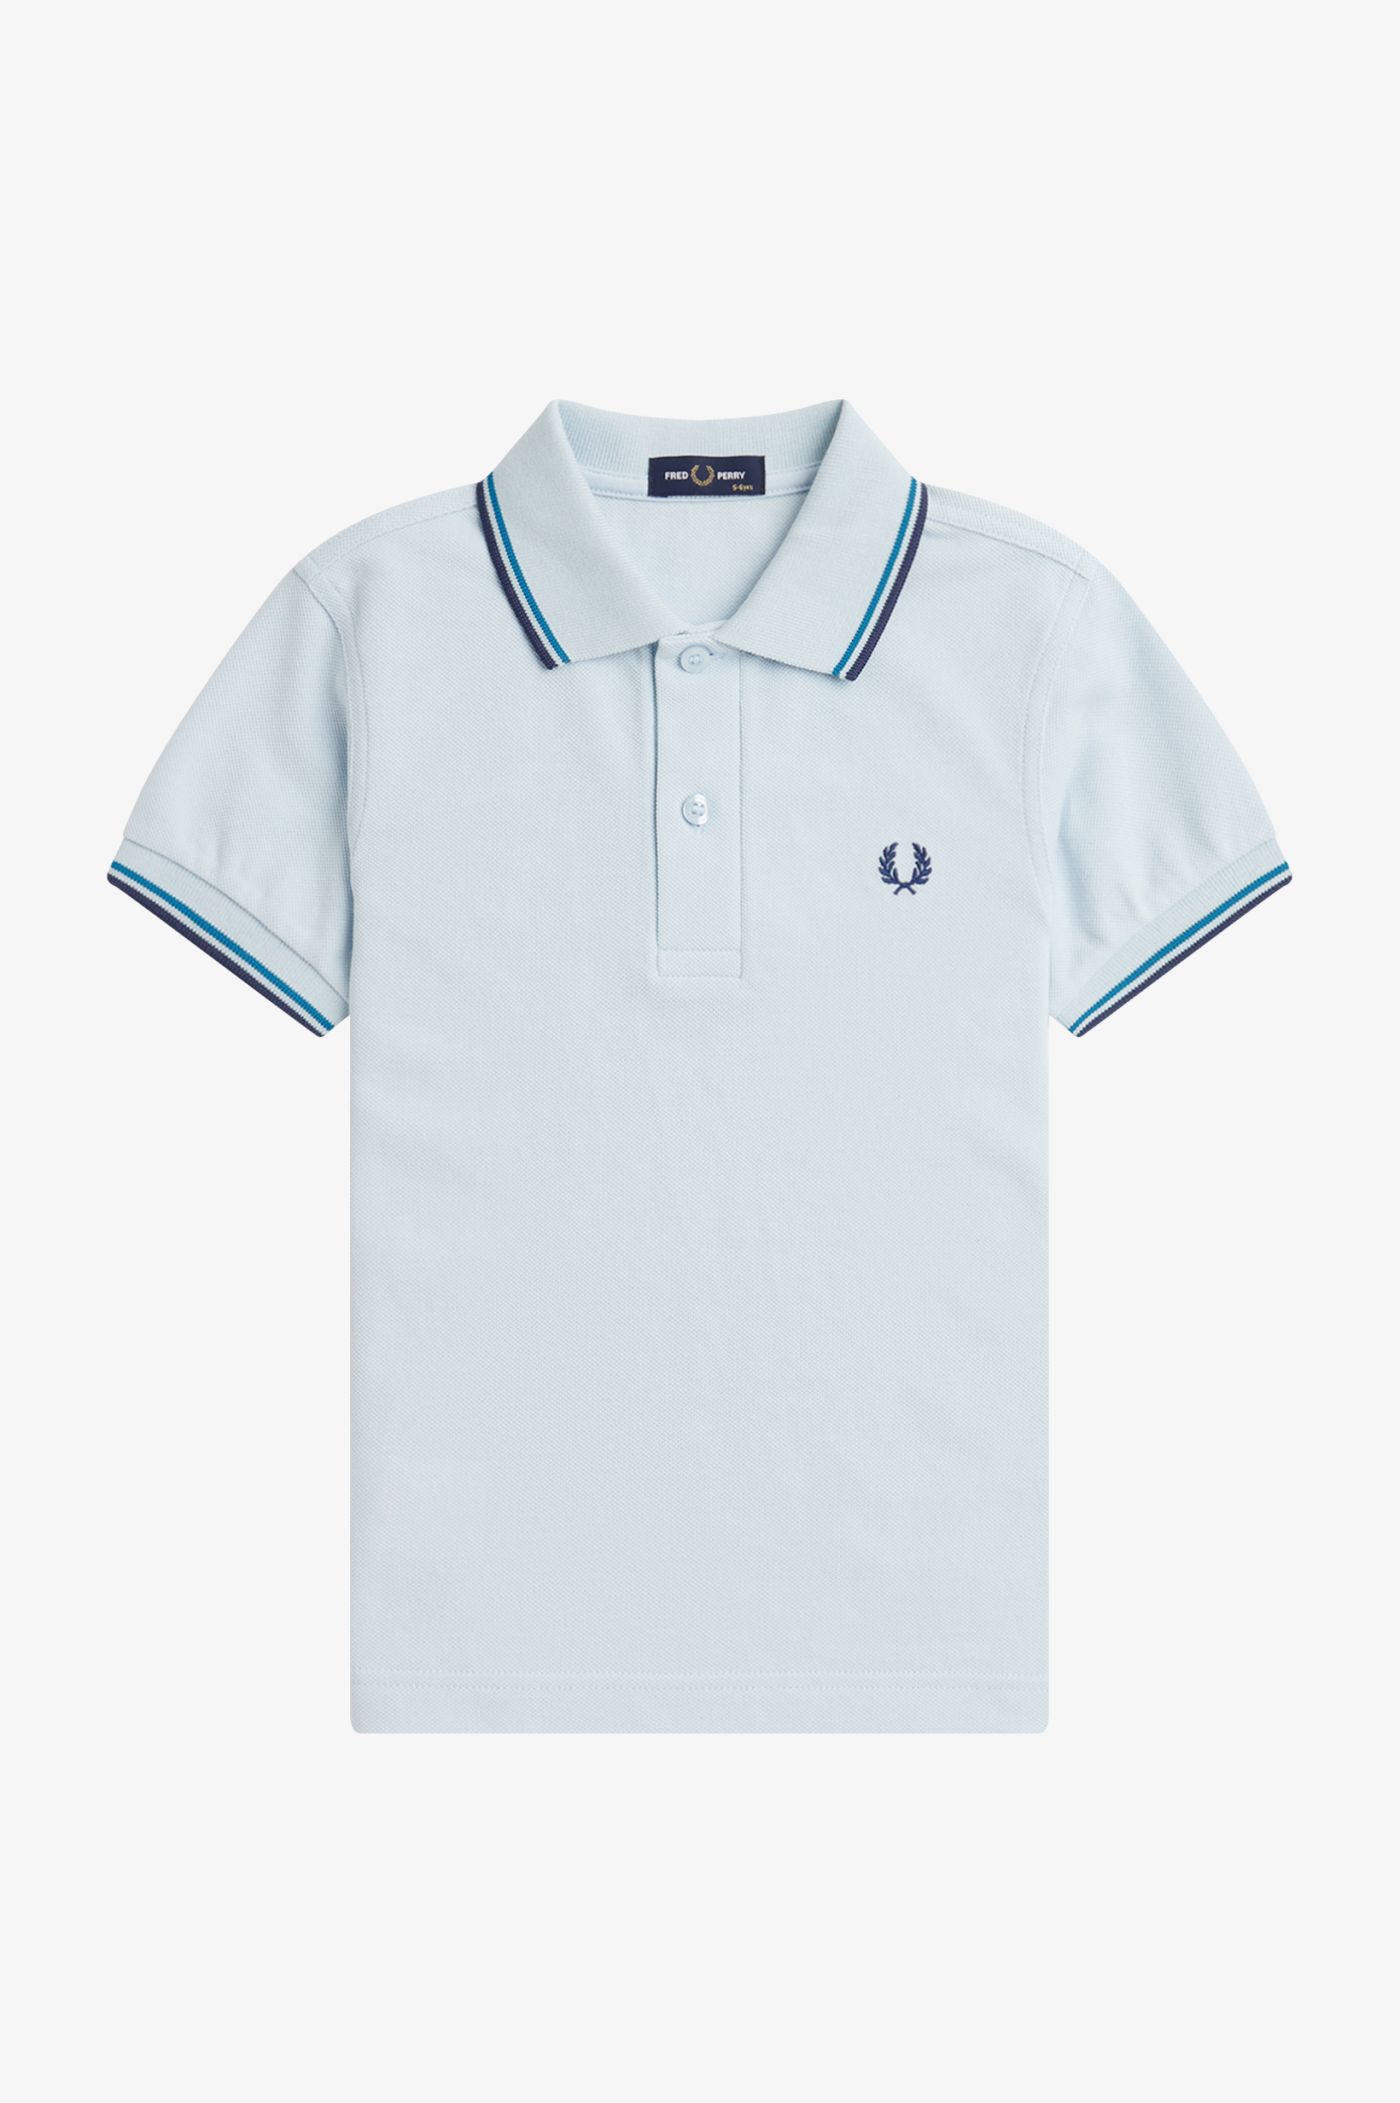 Kids Twin Tipped Fred Perry Shirt - Light Ice / Cyber Blue / Midnight Blue  | Kids | Children\'s Polo Shirts & Kids Designer Clothes | Fred Perry US